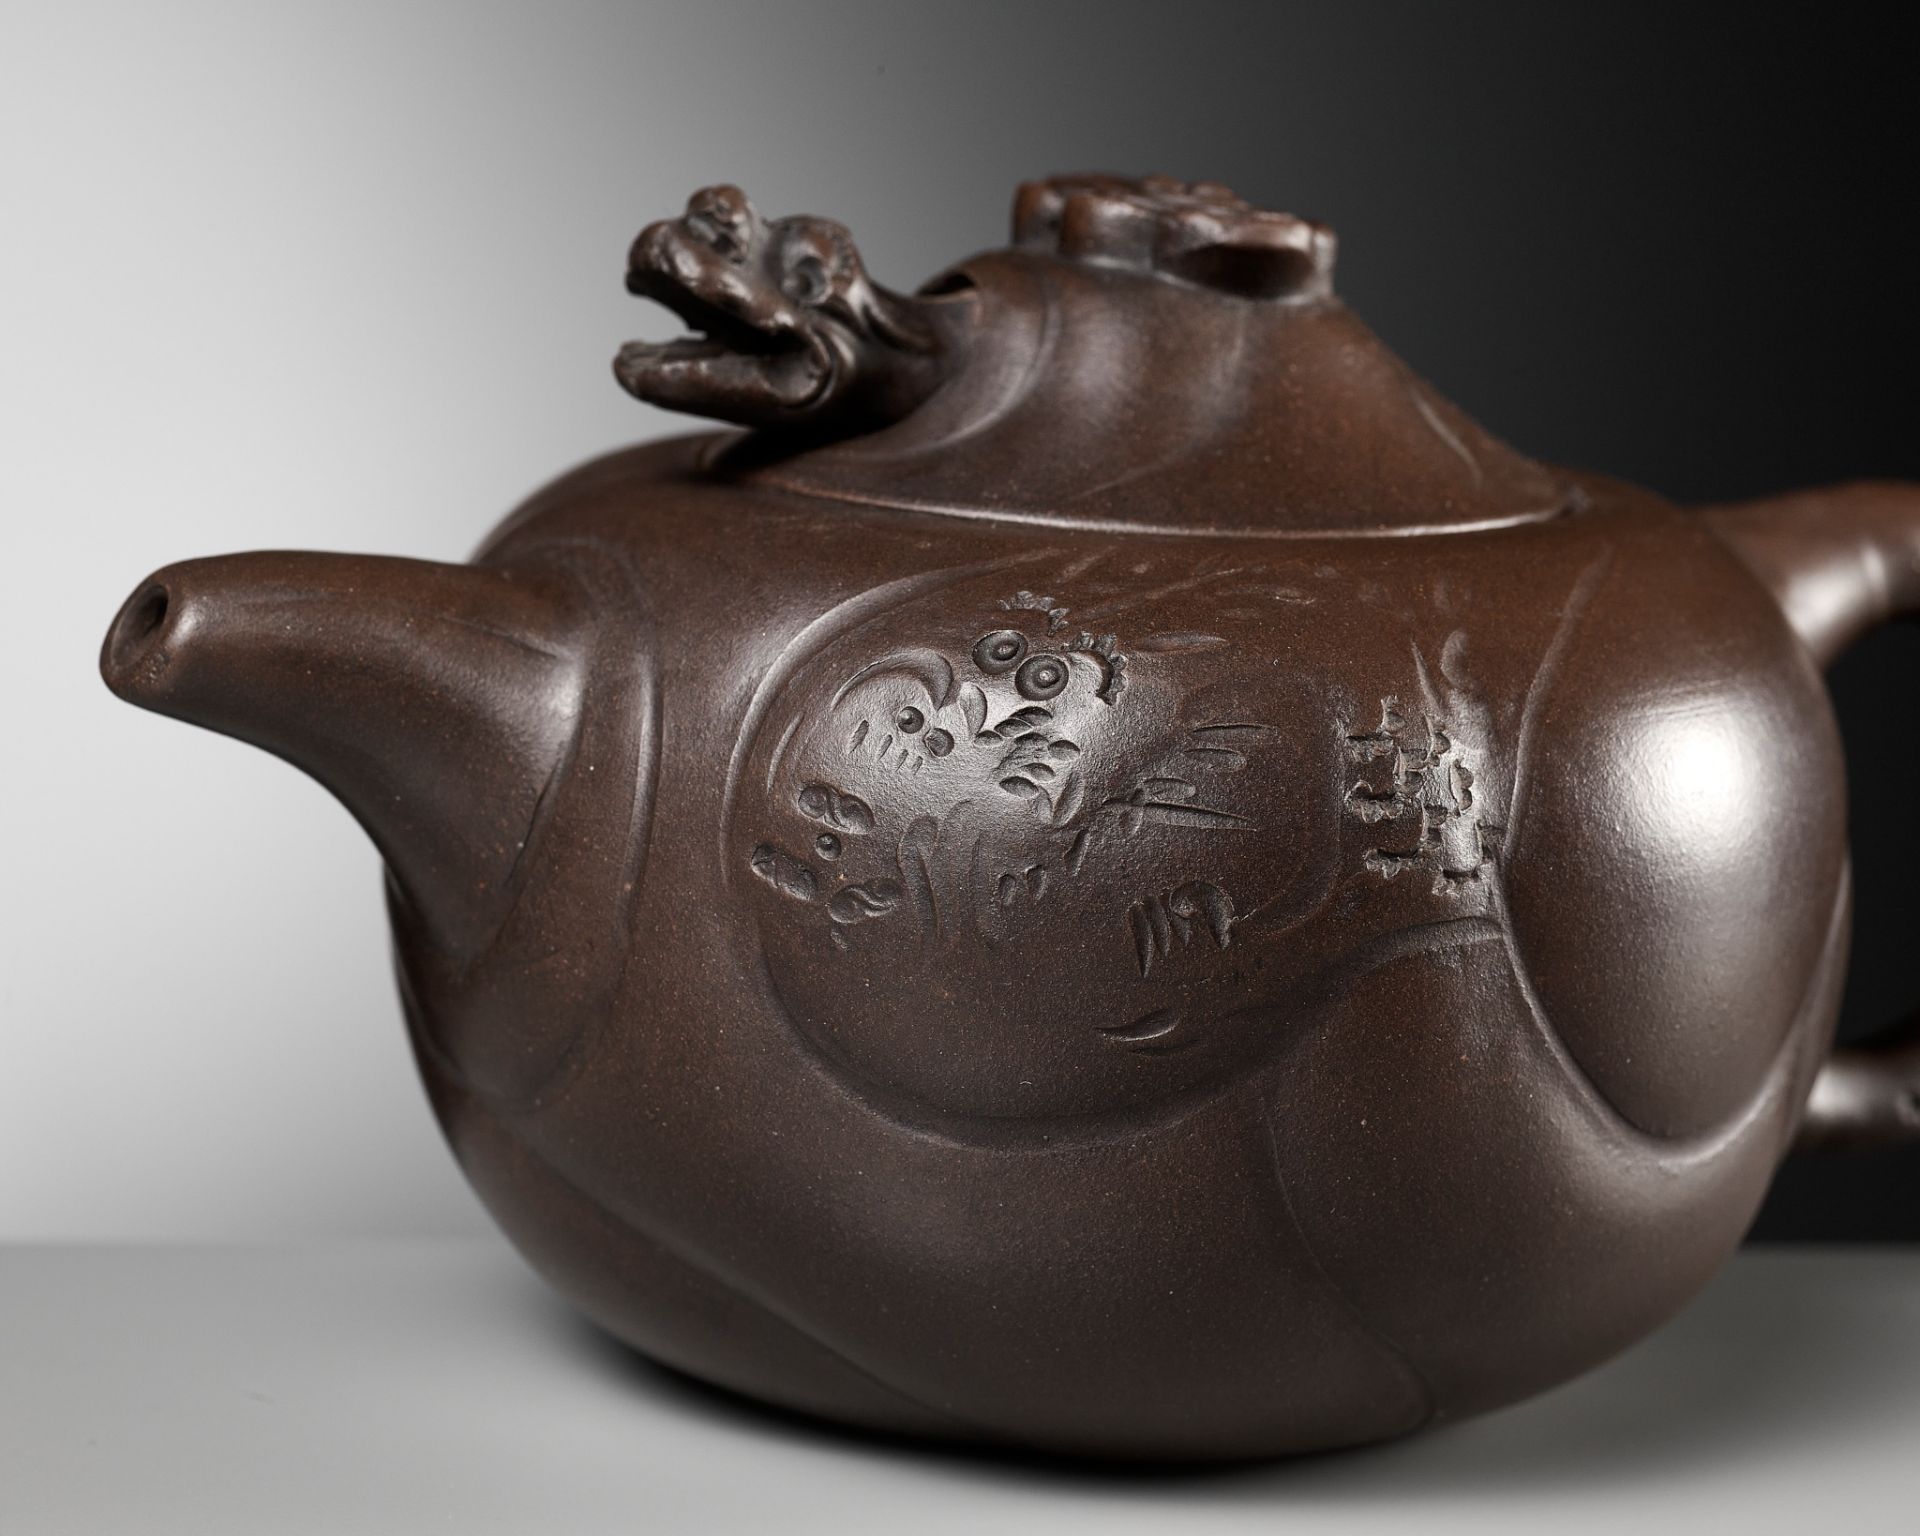 A YIXING STONEWARE 'DRAGON AND CARP' TEAPOT AND COVER, BY WANG YUYING, REPUBLIC PERIOD